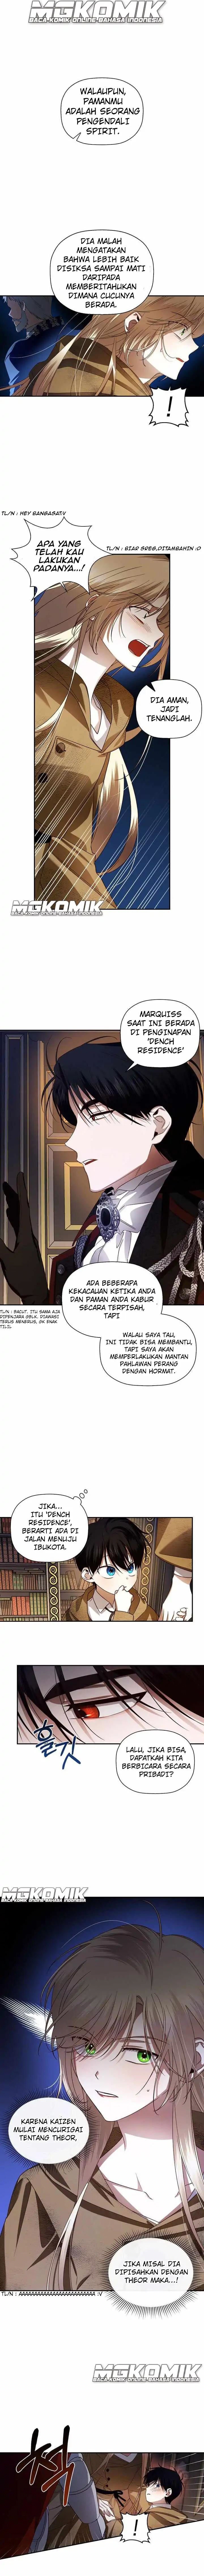 Baca How to Hide the Emperor’s Child Chapter 3  - GudangKomik